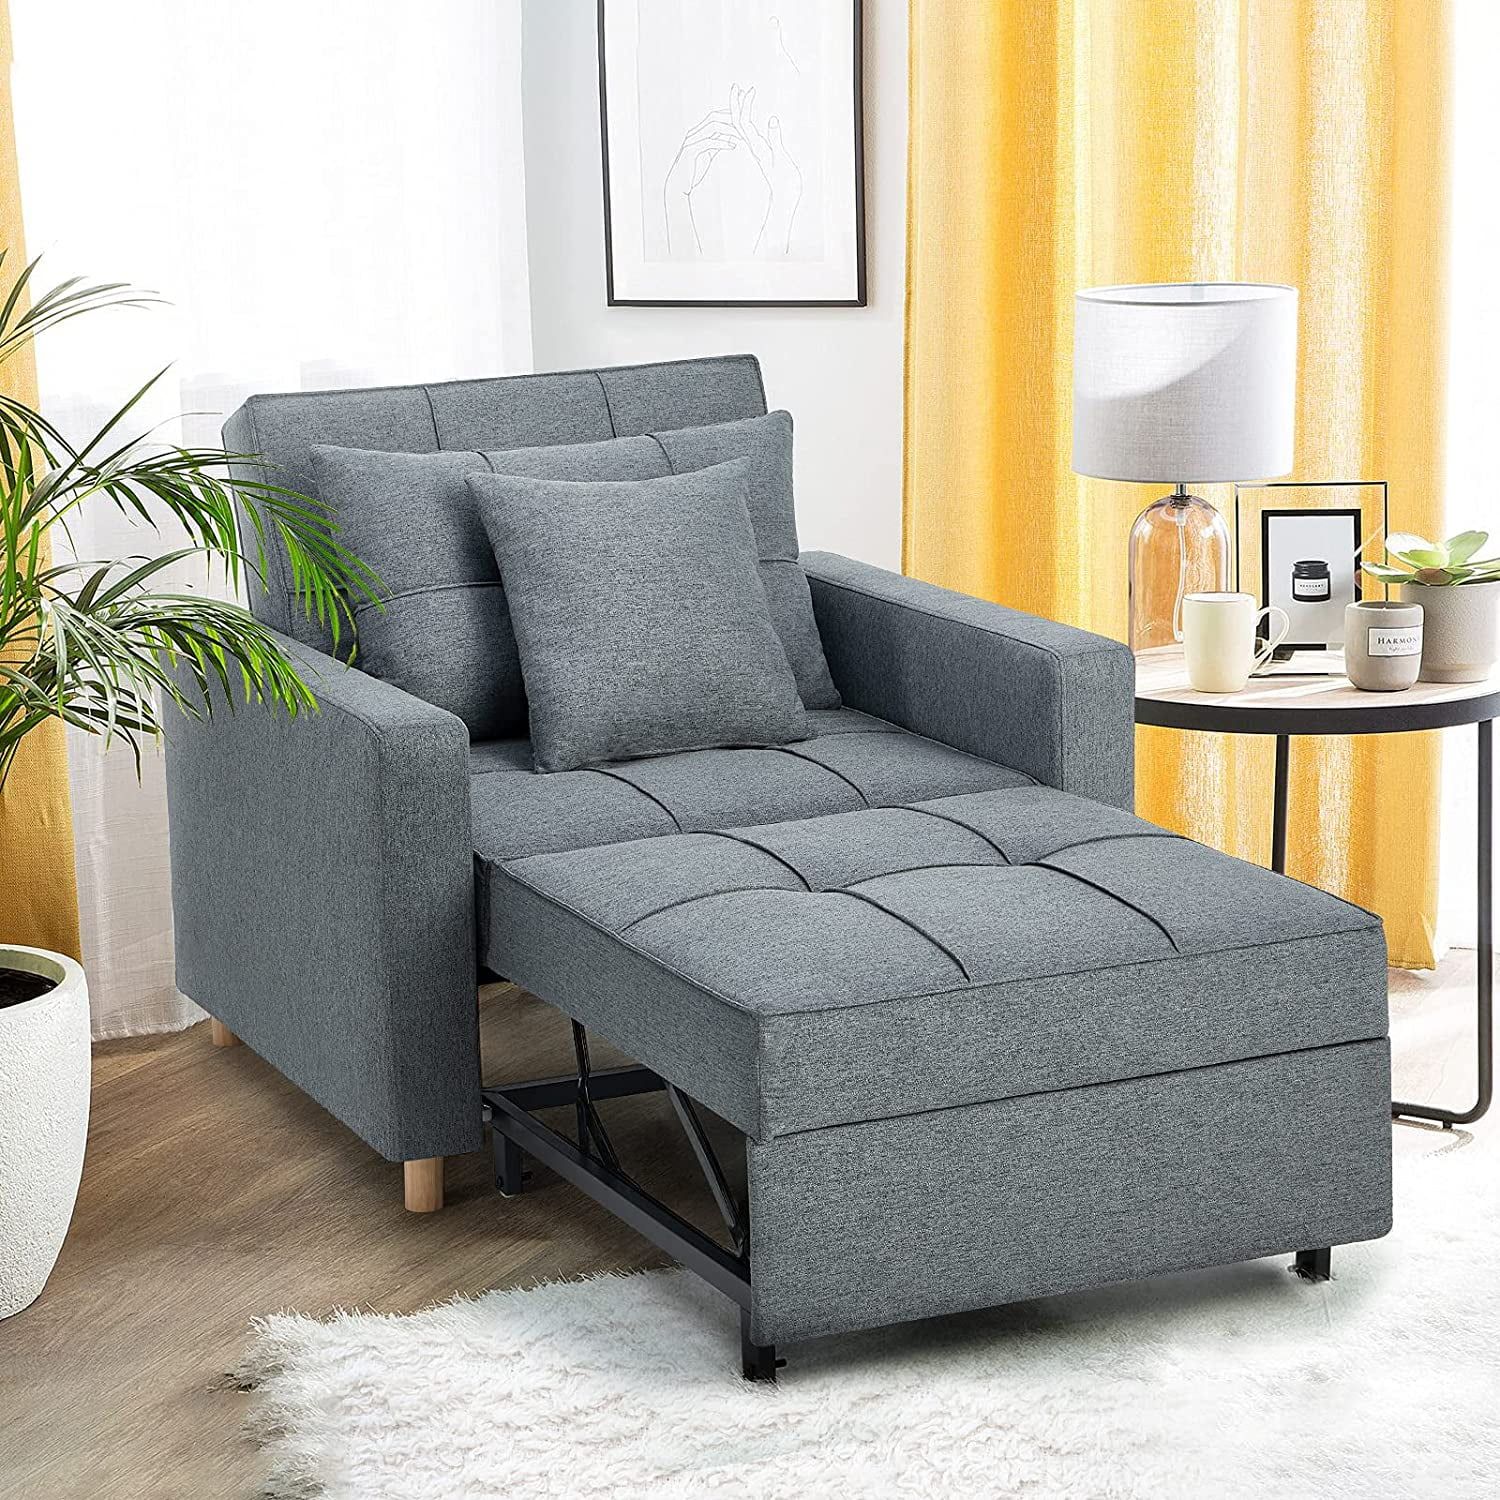 Buy Yodolla 3 In 1 Futon Sofa Bed Chair,convertible Sofa Sleeper Dark Within Convertible Gray Loveseat Sleepers (View 17 of 20)